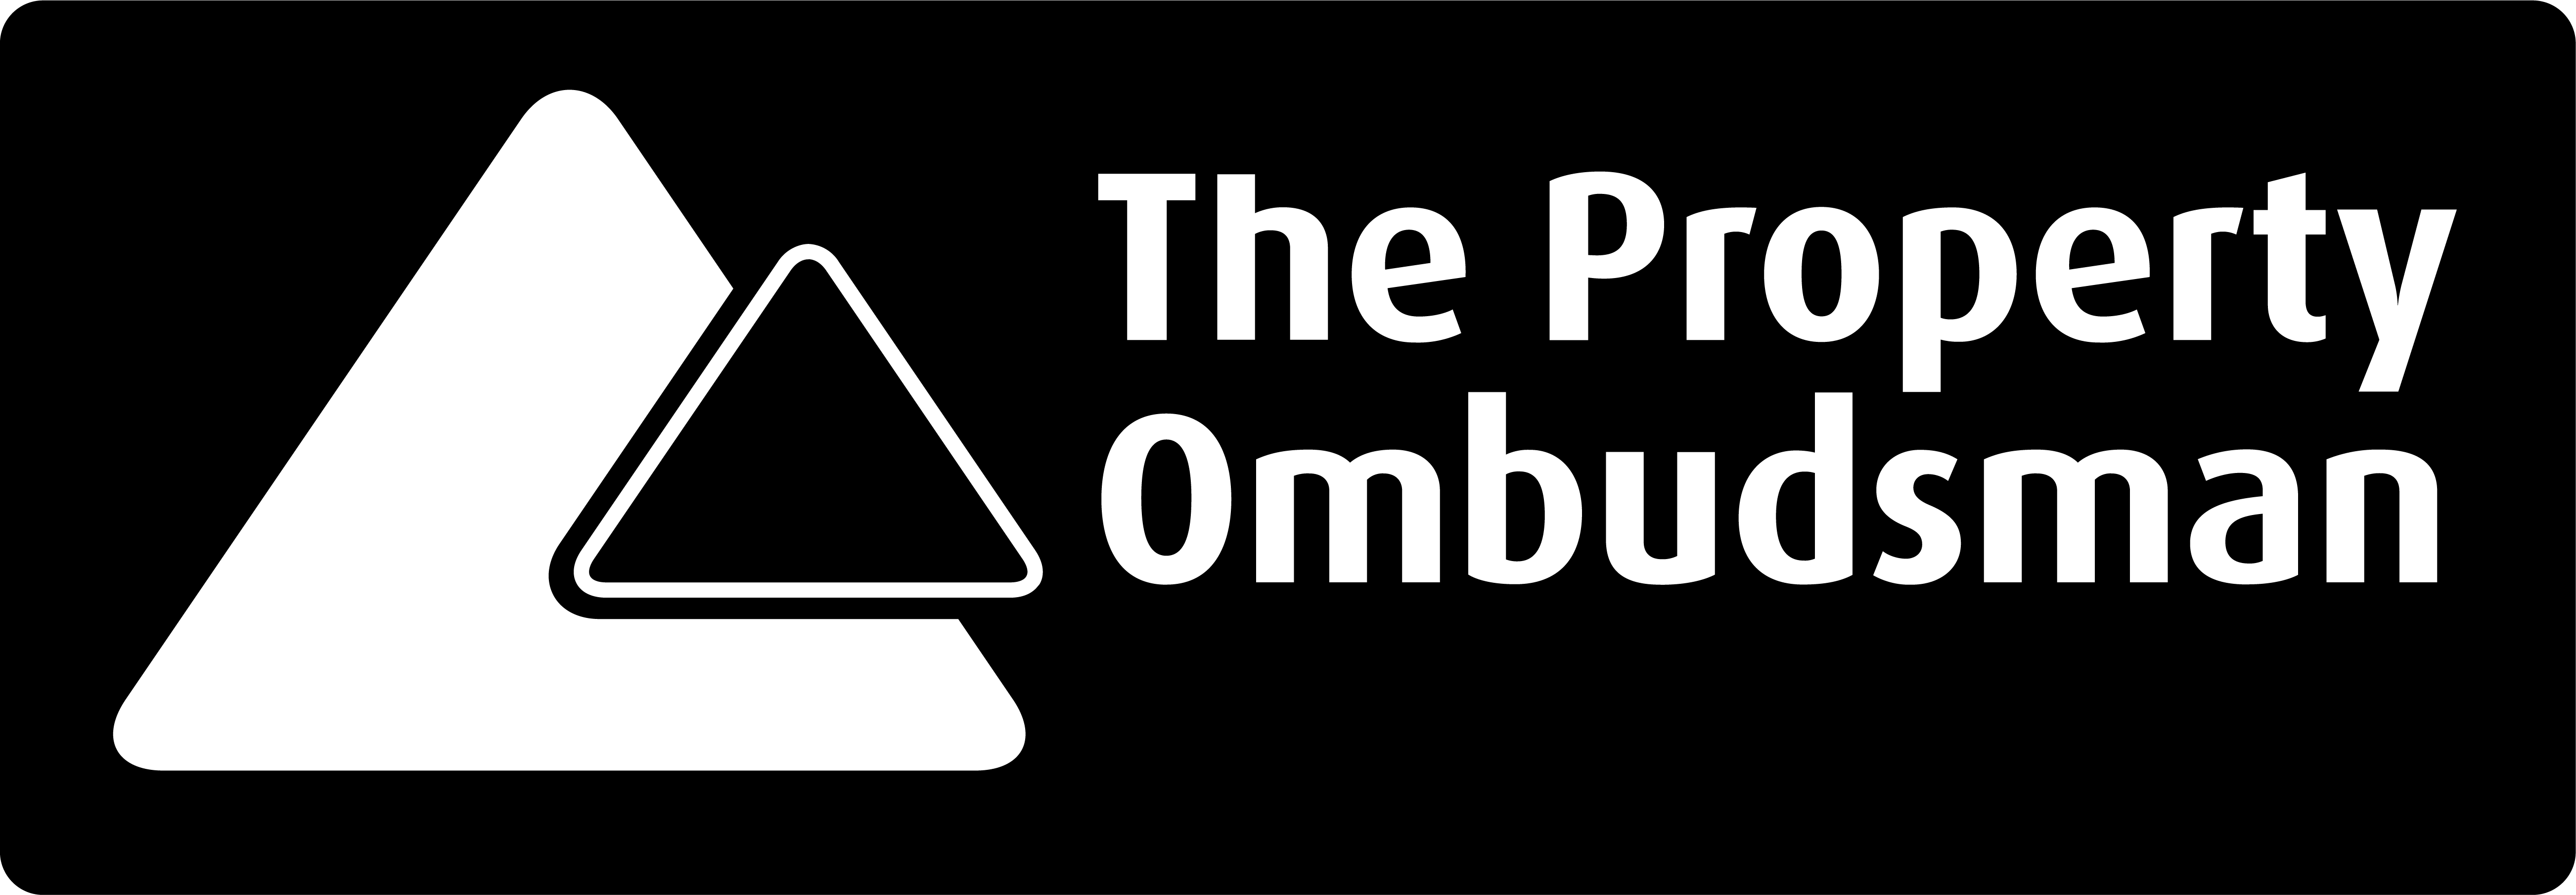 the-property-ombudsman.png